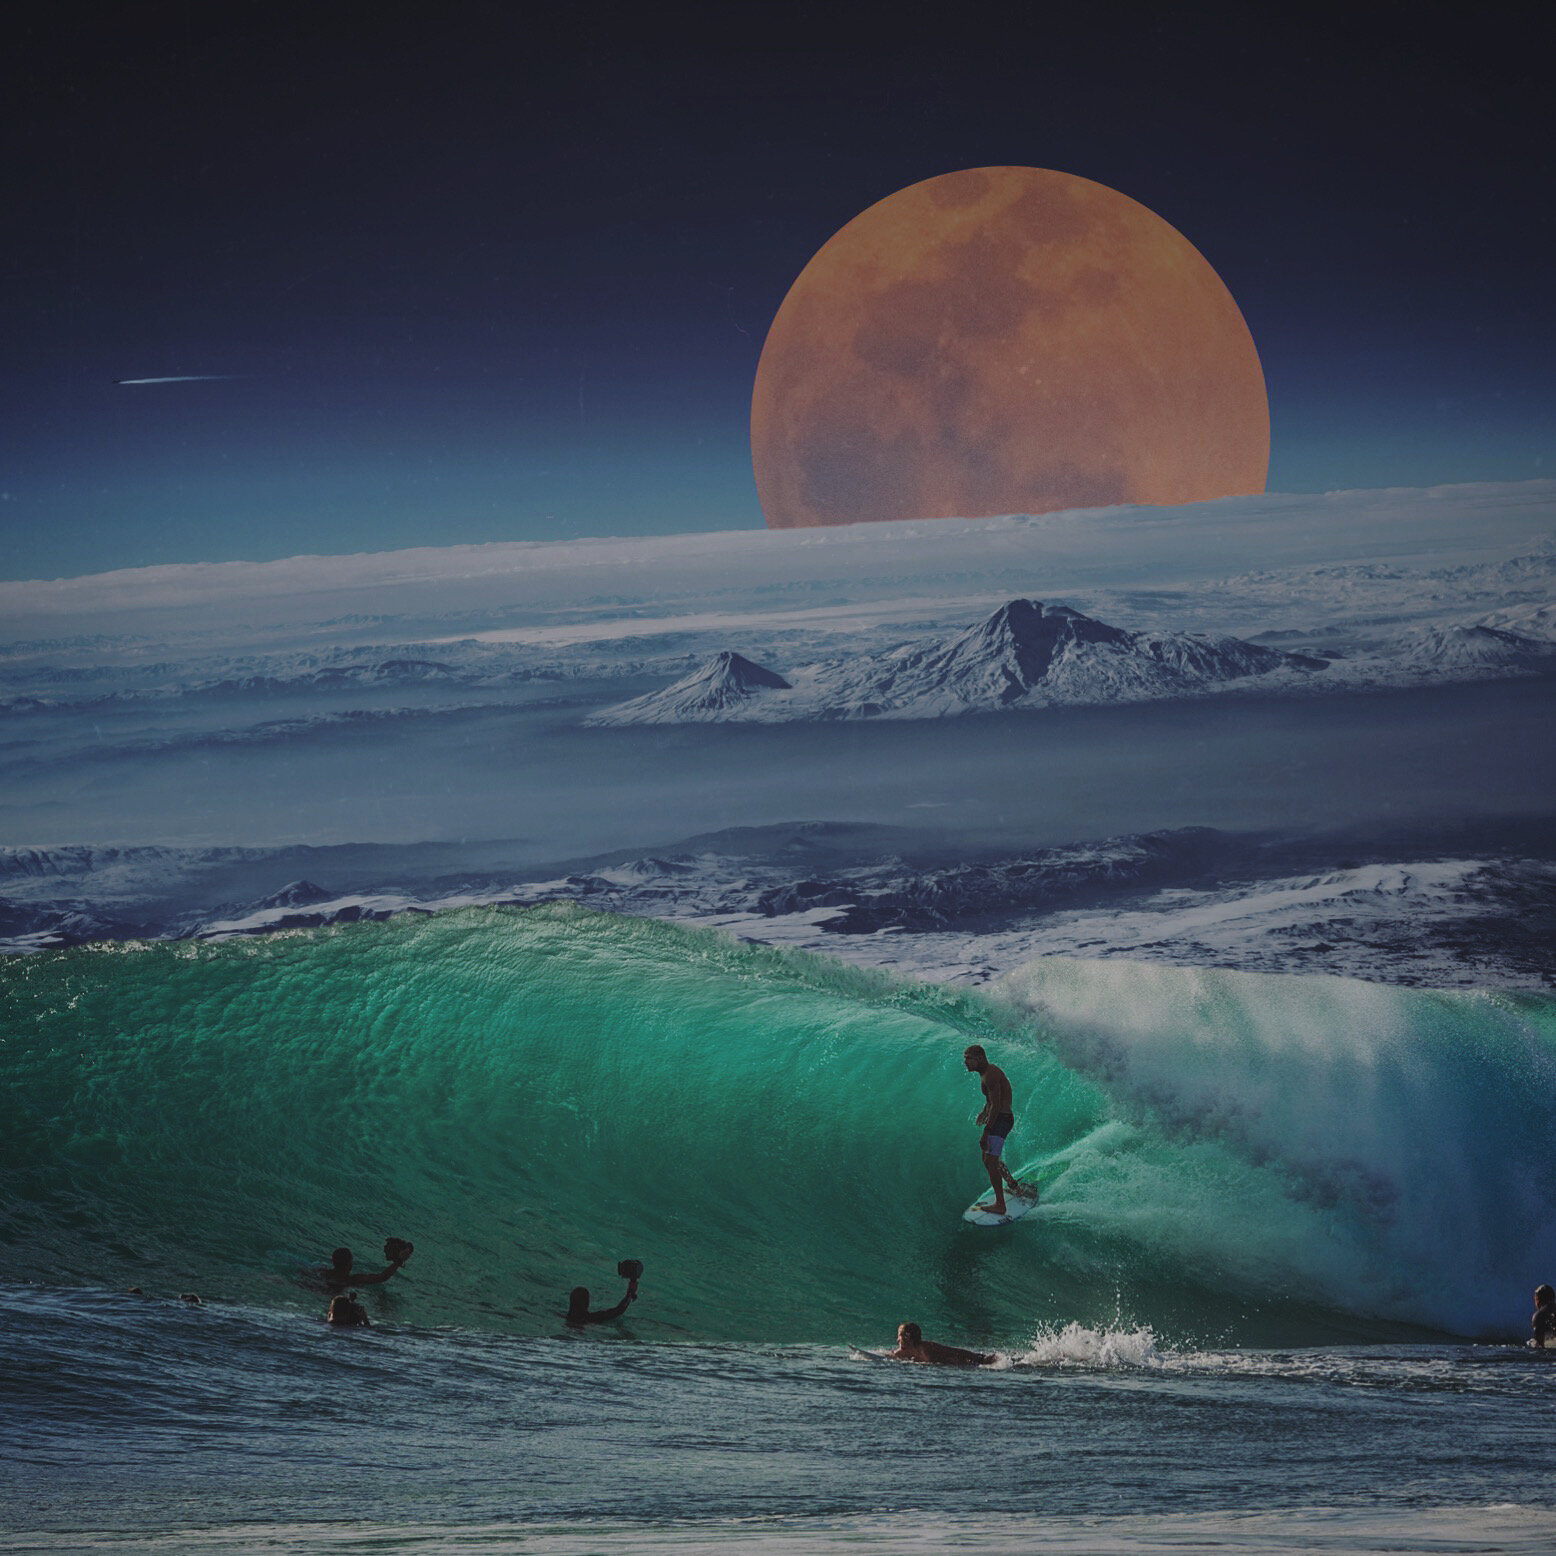 That wave under the moon